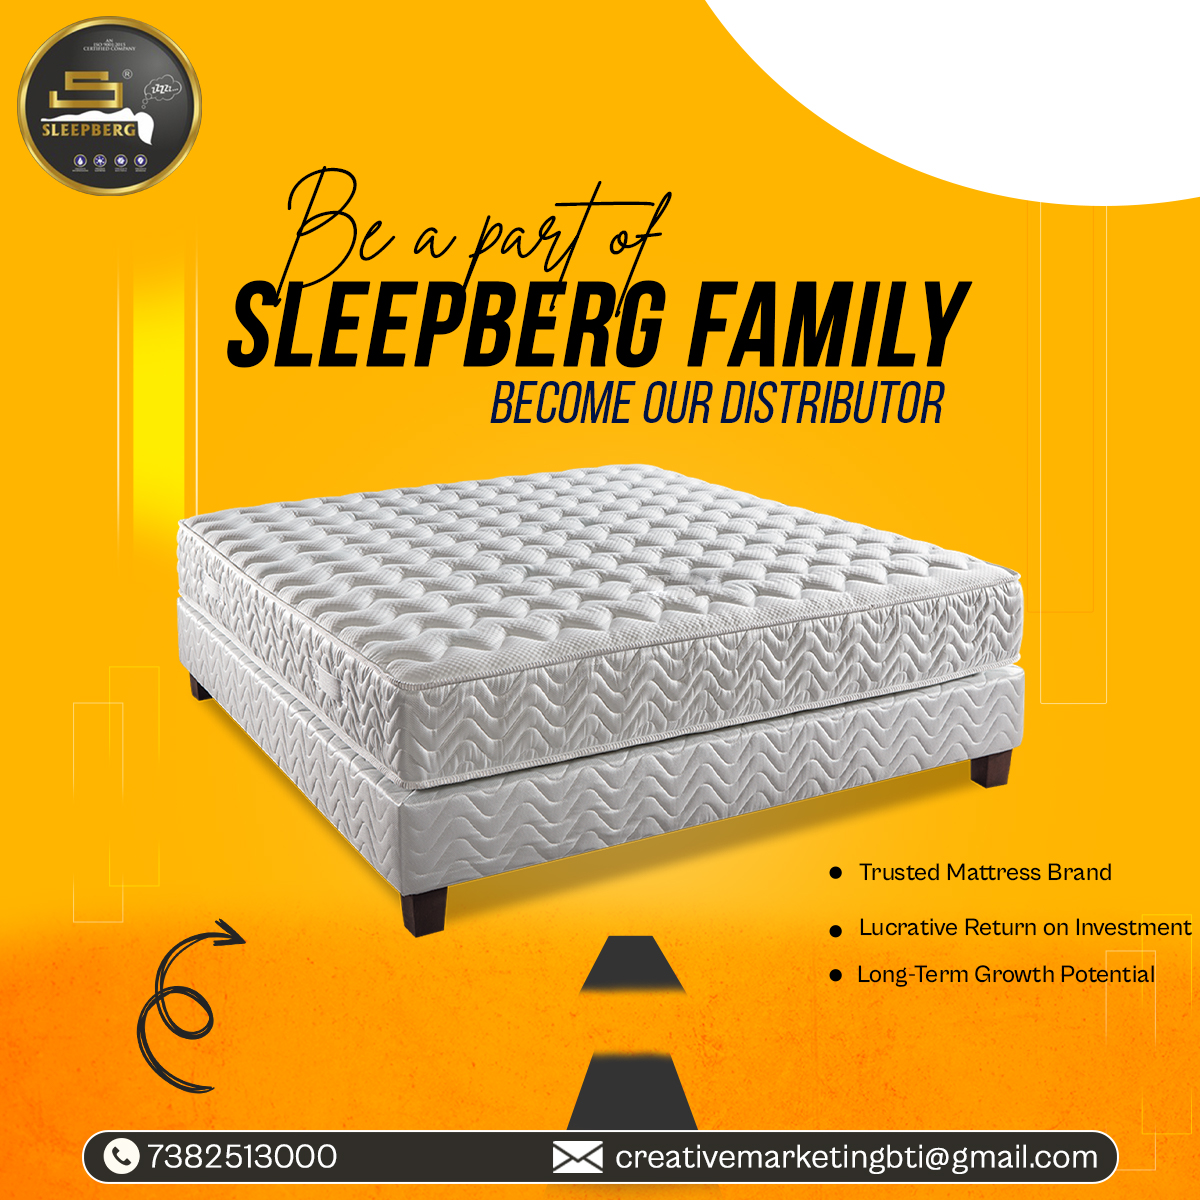 Be a part of Sleepberg Family... Become Our distributor

So, contact us today👇
📞 Call: 073825 13000
📧 Email: creativemarketingbti@gmail.com
.
#sleepbergmattress #sleepberg #sleepbergbestmattress #bestmattressforbackpain #comfysleepmattress #relieffrompain #JoinSleepberg